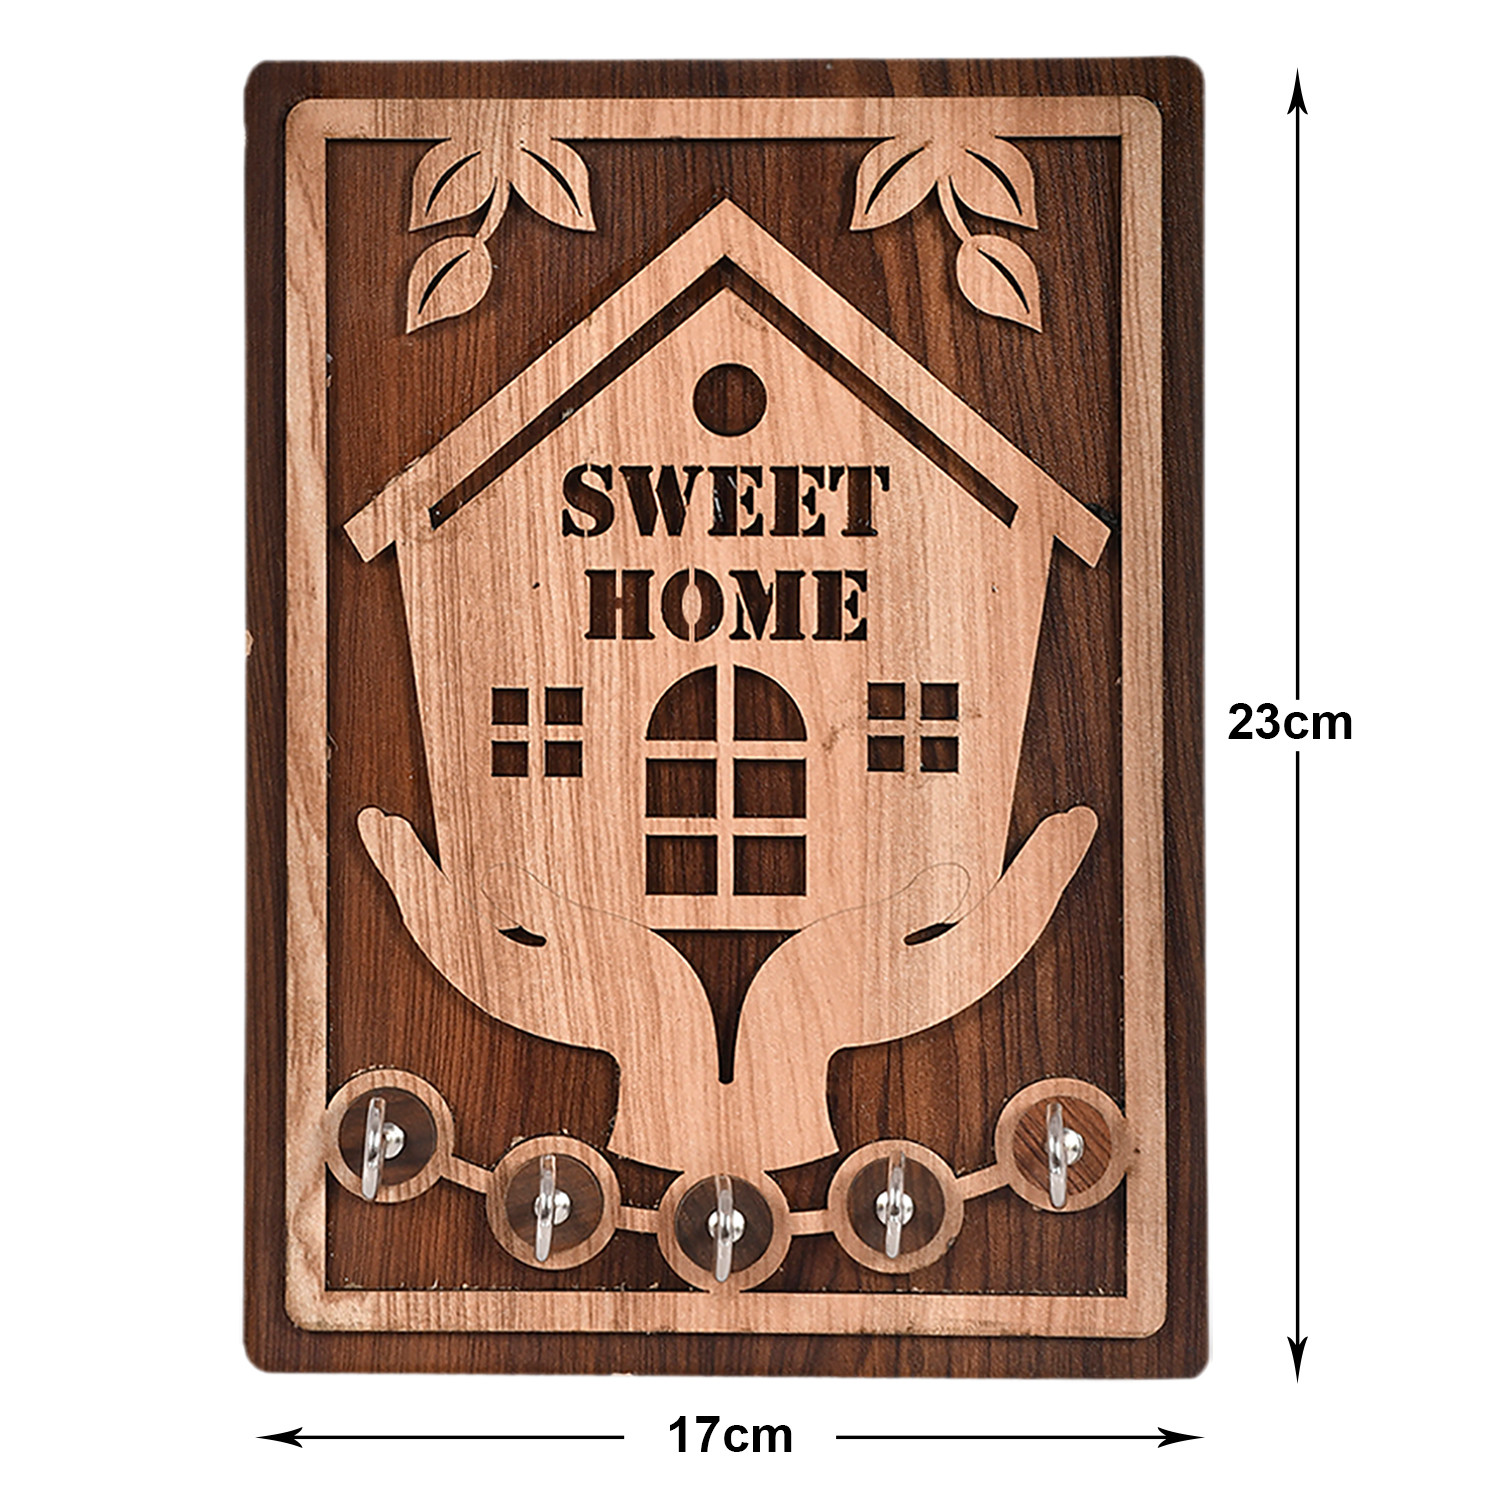 Kuber Industries Sweet Home Design Wooden Wall Key Holder With 5 Hooks (Brown)-45KM053